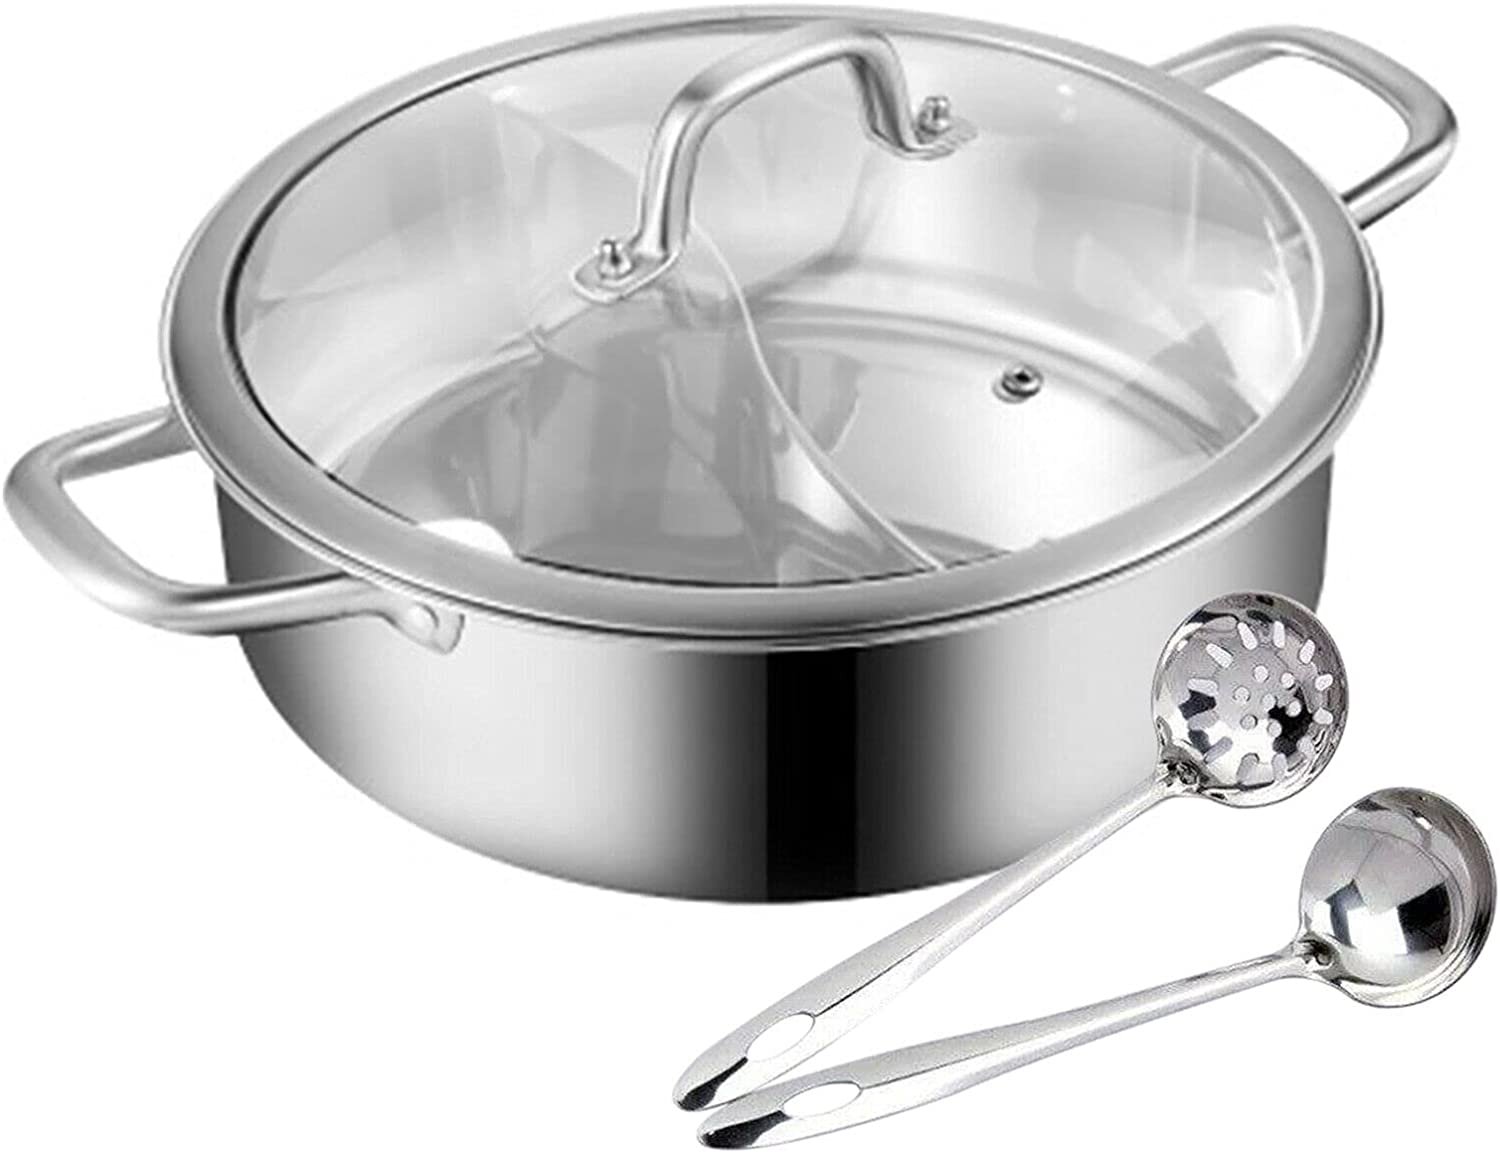 Induction Stockpot Cooking Stew Soup Casserole Pan Stockpot Hob All Sizes 